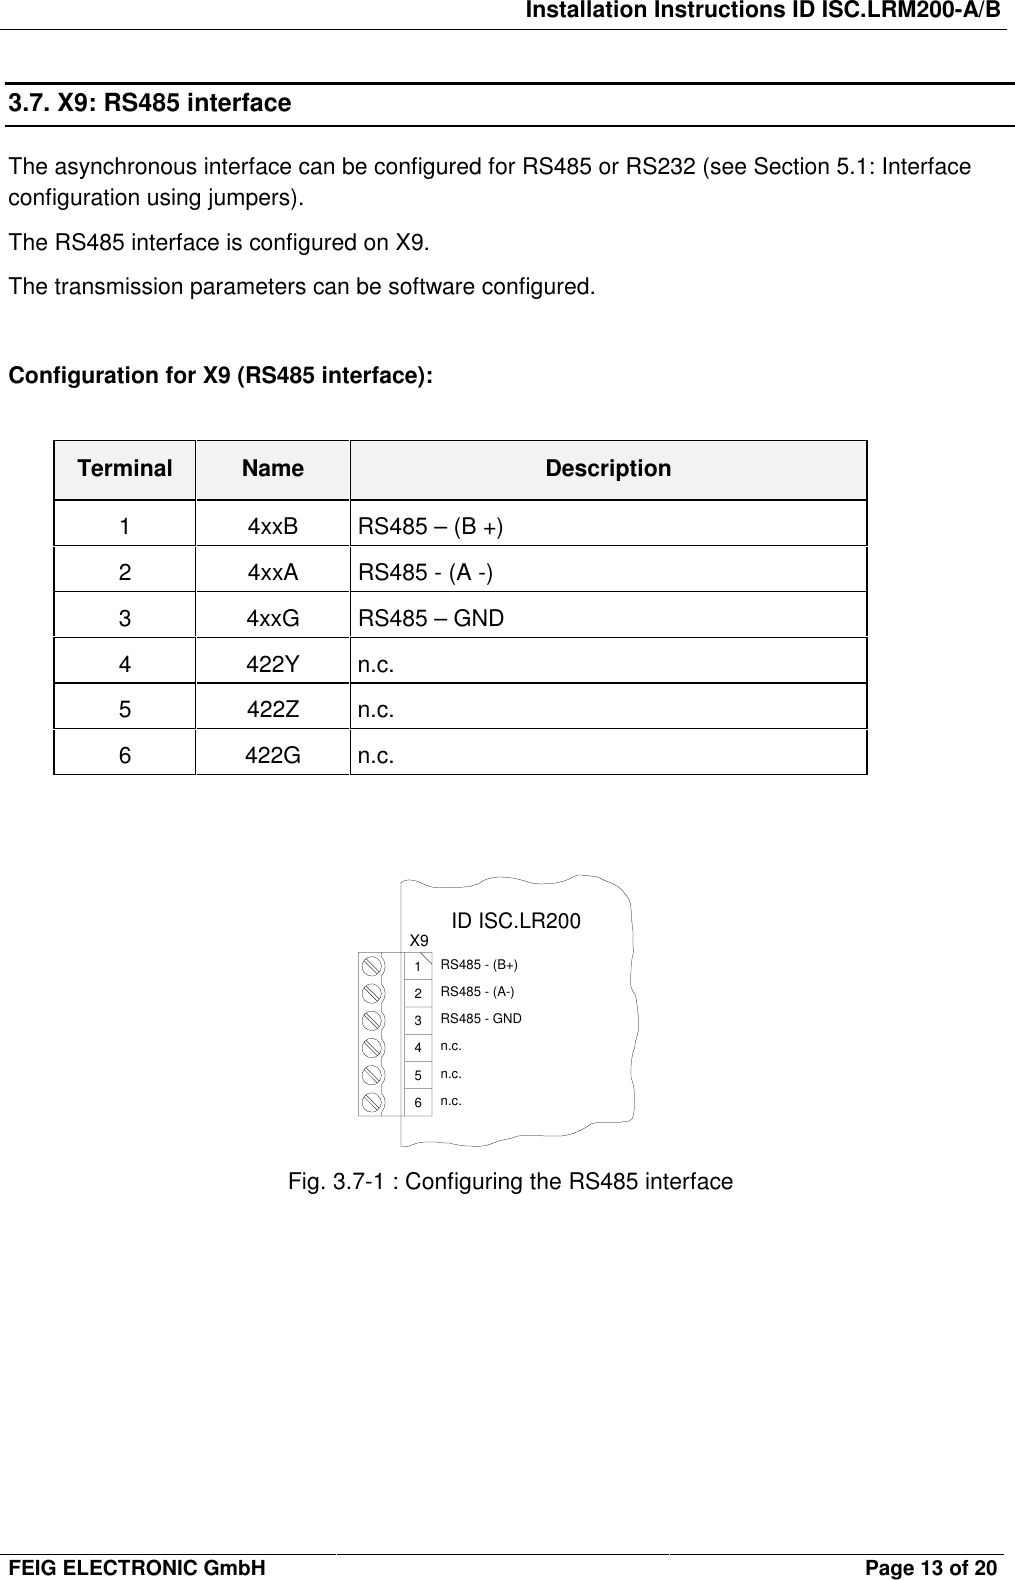 Installation Instructions ID ISC.LRM200-A/BFEIG ELECTRONIC GmbH Page 13 of 203.7. X9: RS485 interfaceThe asynchronous interface can be configured for RS485 or RS232 (see Section 5.1: Interfaceconfiguration using jumpers).The RS485 interface is configured on X9.The transmission parameters can be software configured.Configuration for X9 (RS485 interface):Terminal Name Description1 4xxB RS485 – (B +)2 4xxA RS485 - (A -)3 4xxG RS485 – GND4 422Y n.c.5 422Z n.c.6 422G n.c.Fig. 3.7-1 : Configuring the RS485 interfaceX91234ID ISC.LR20056n.c.n.c.n.c.RS485 - GNDRS485 - (A-)RS485 - (B+)